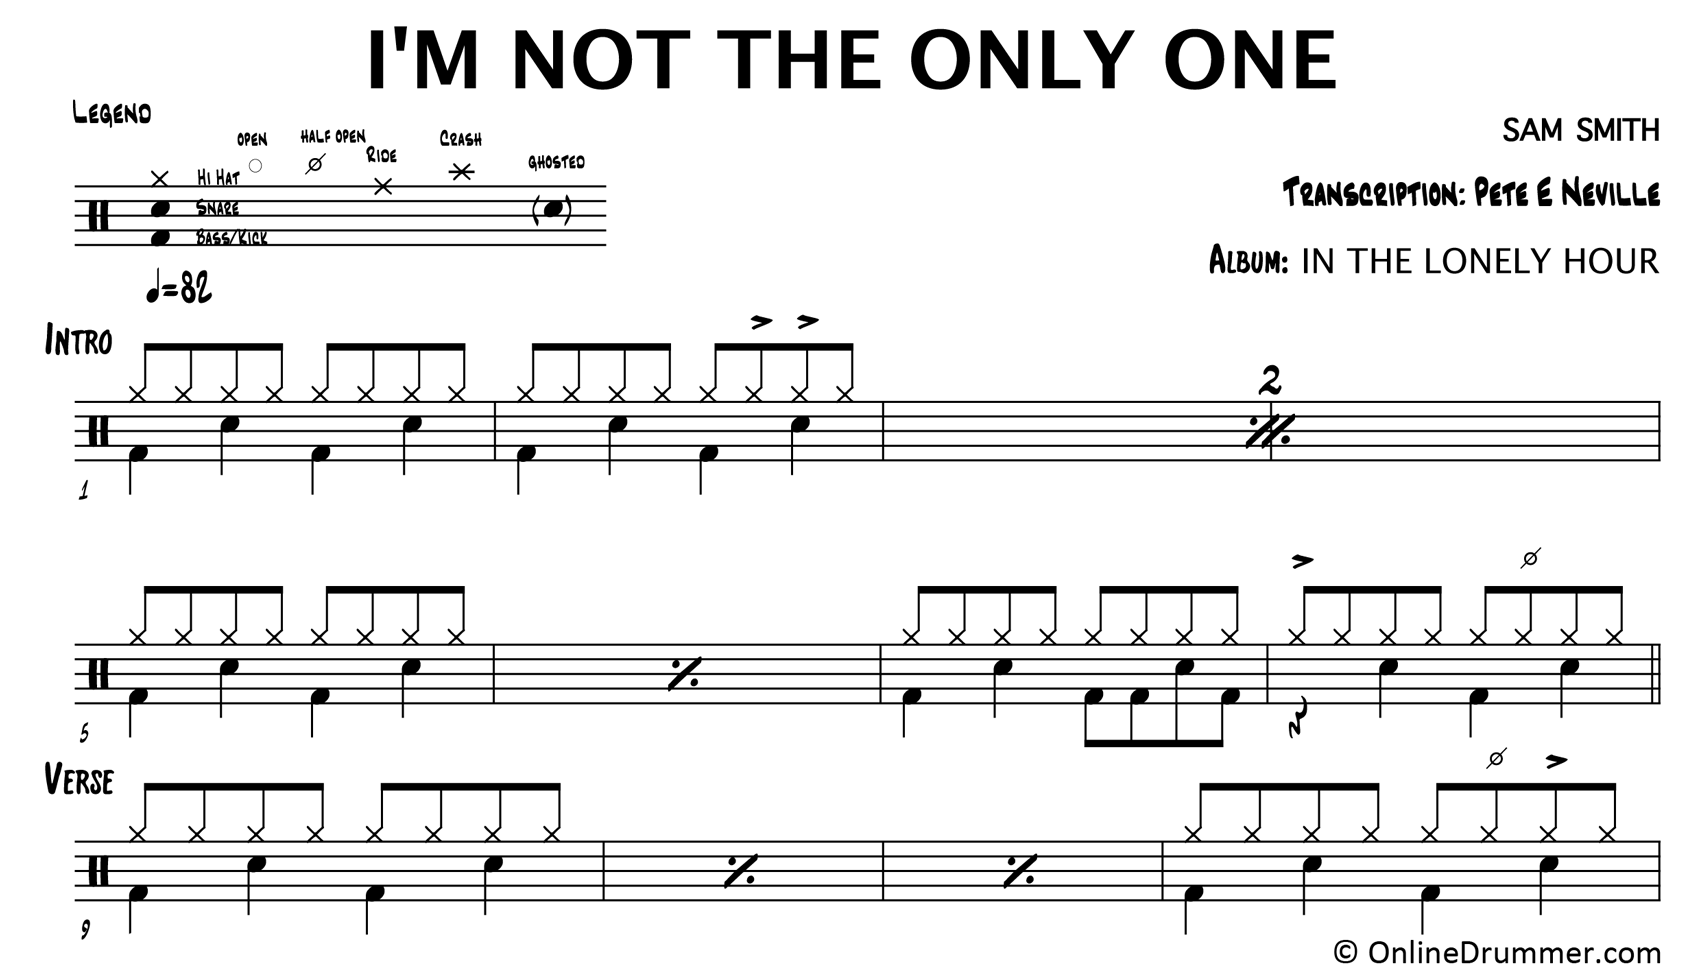 Free sheet music: You Only Live Once- by Strokes (The), Play and